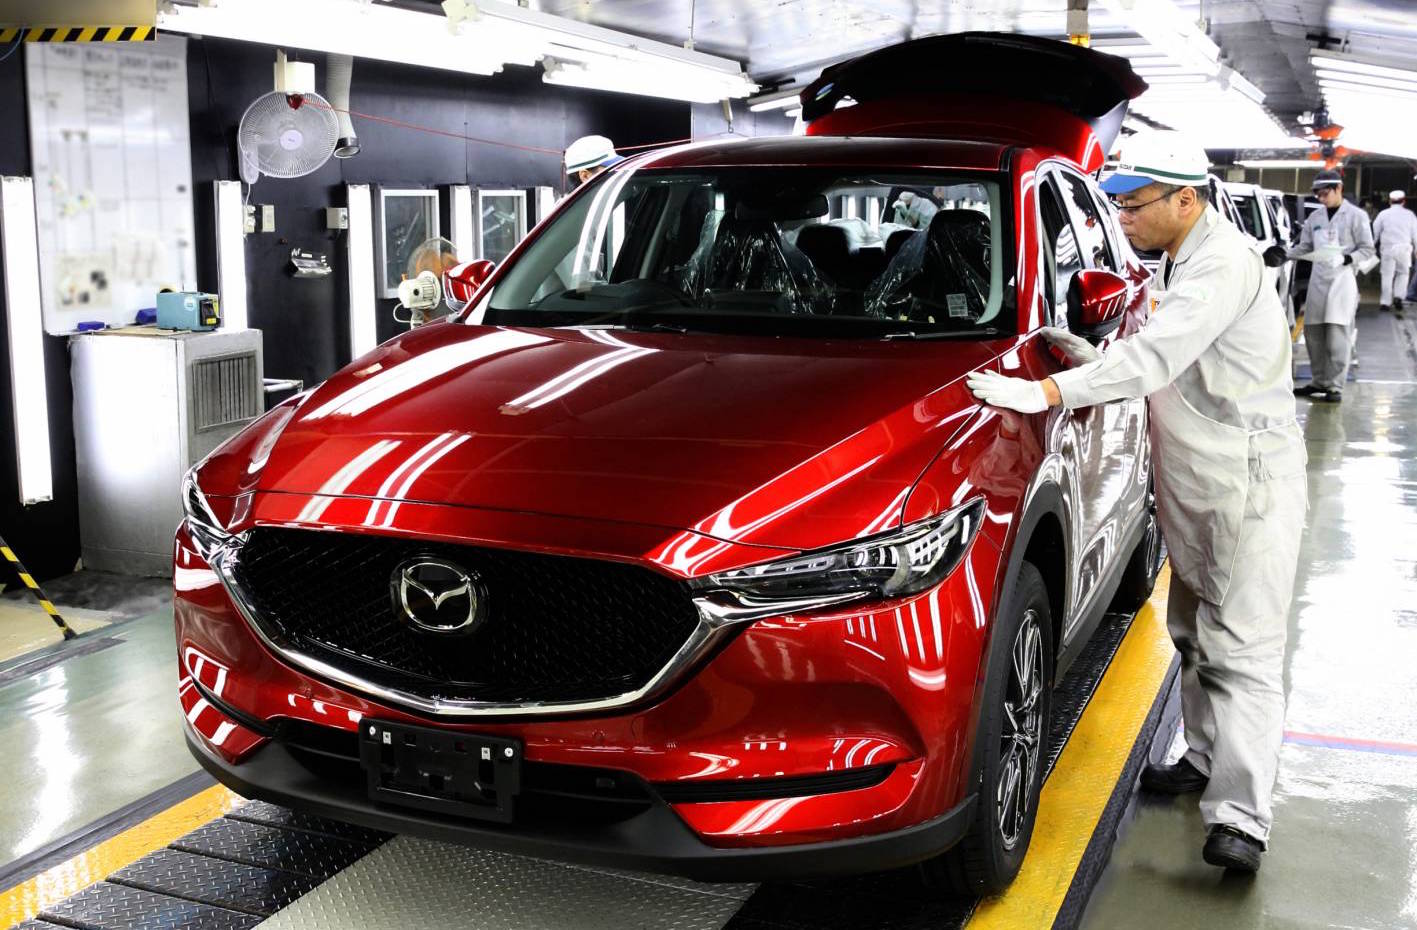 New Mazda CX-5 production commences, lands in Australia first half 2017